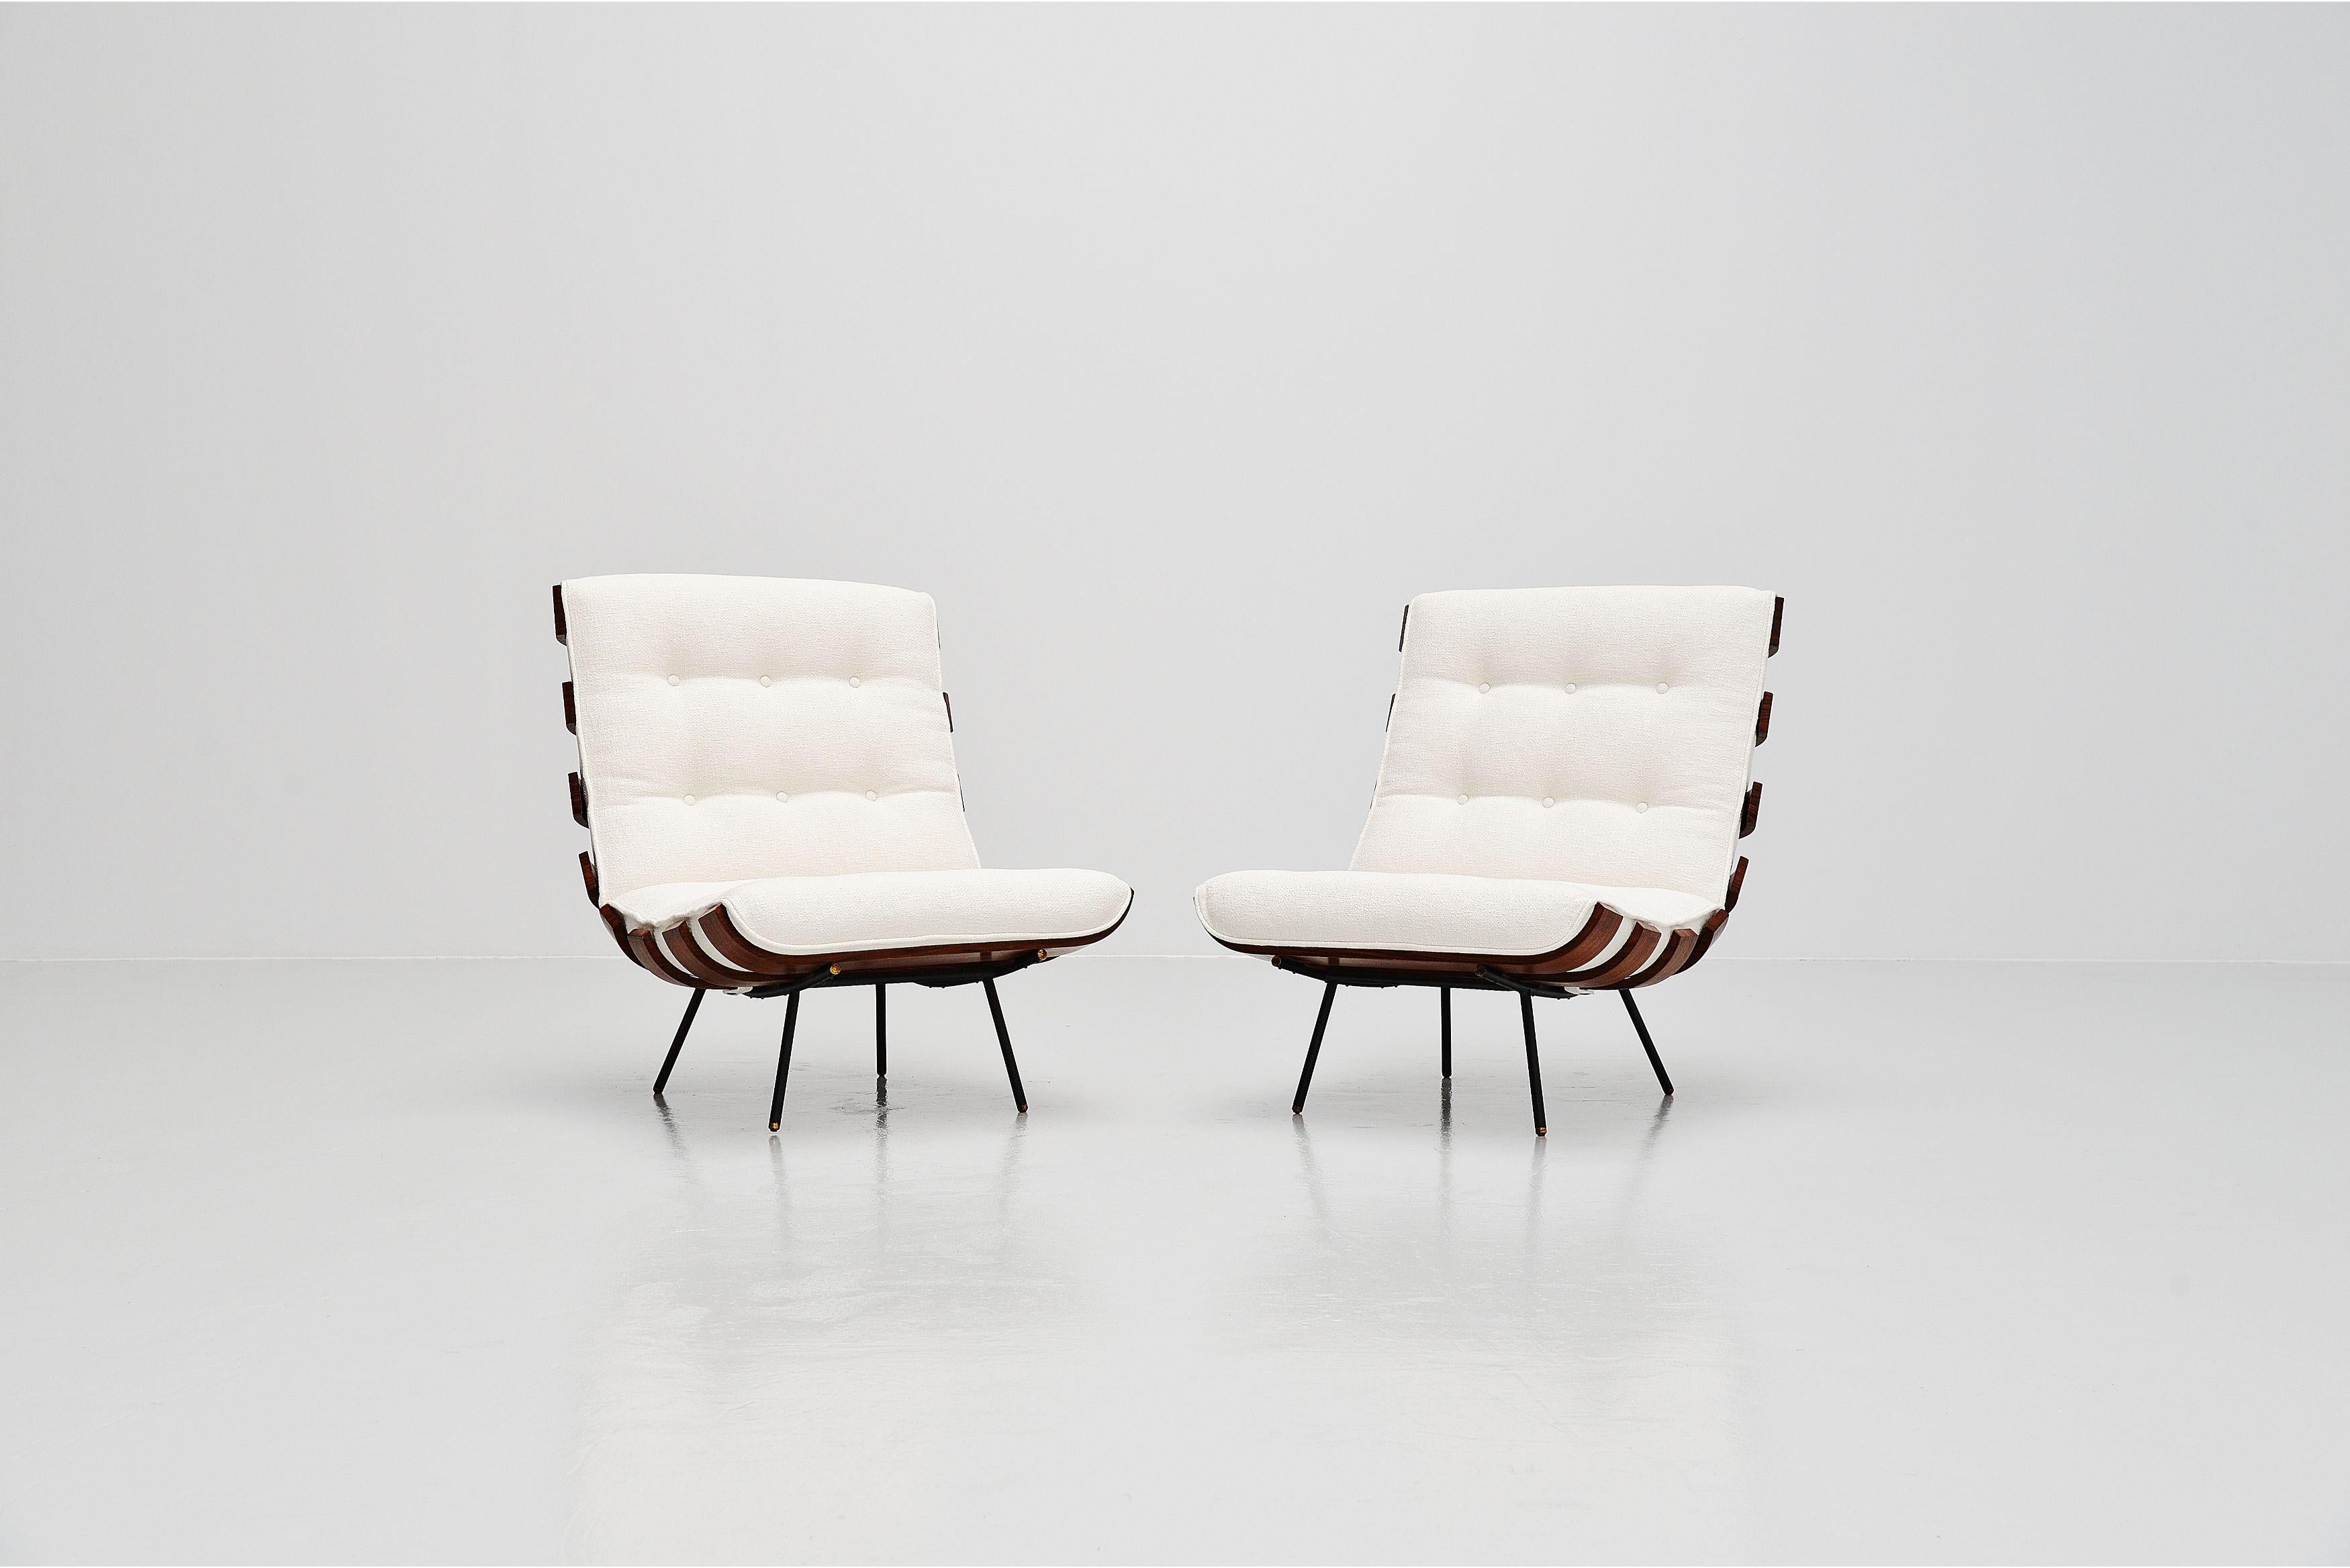 Beautiful and iconic 'Costela' lounge chairs designed by Carlo Hauner and Martin Eisler and manufactured by Forma, Italy 1960. This is the European version of the Costela chairs, manufactured under license by Forma, Italy. These so called Costela